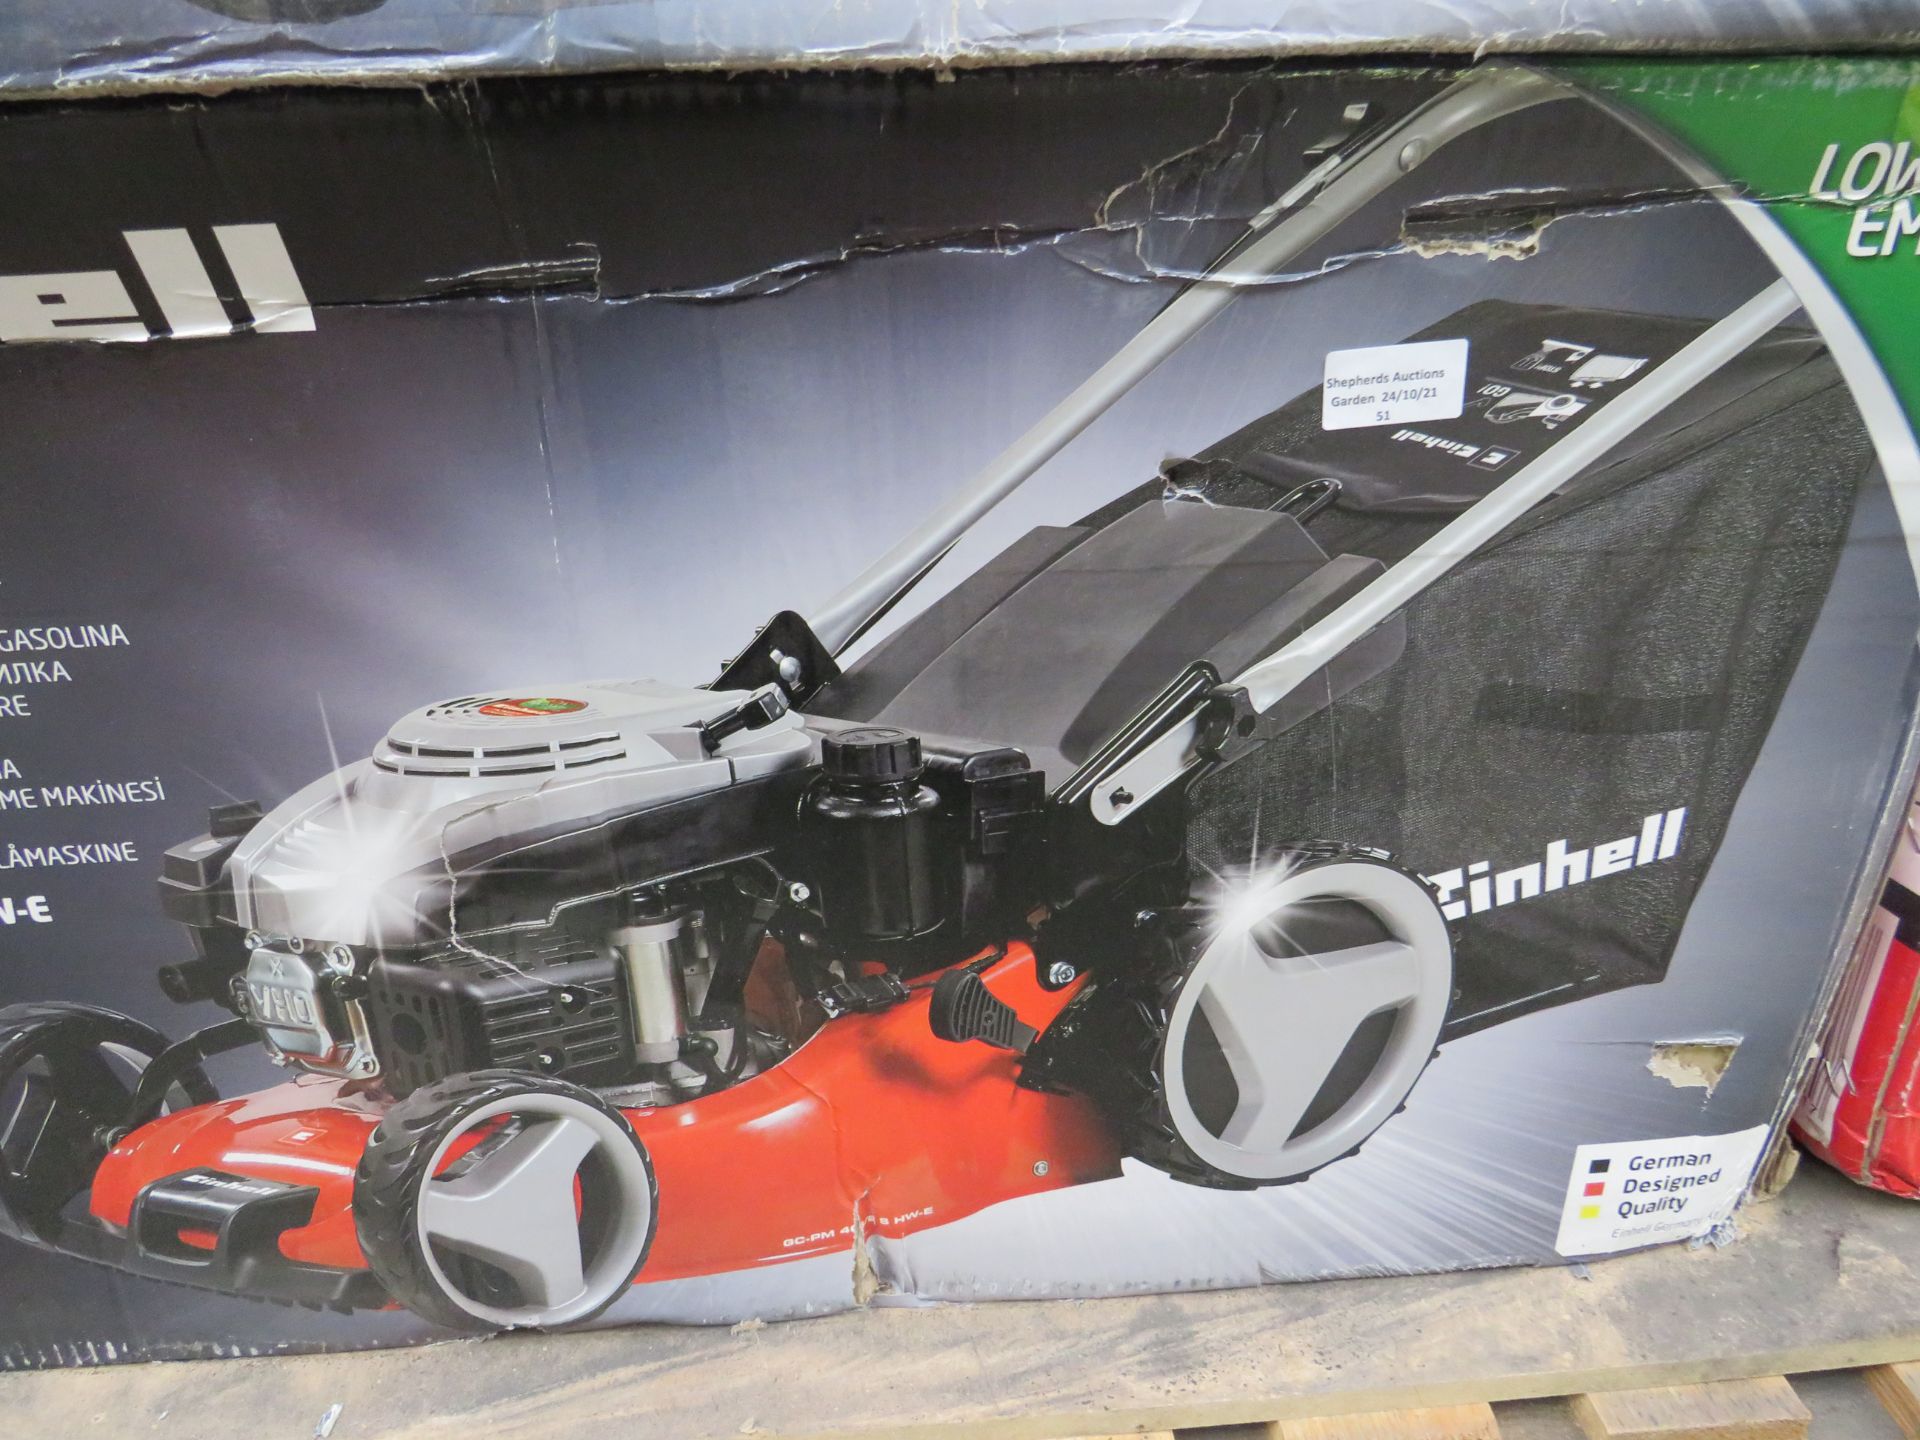 1x Einhell - Self-Propelled Petrol Lawn Mower GC-PM 46/2 S HW-E - Used Condition - Needs Some